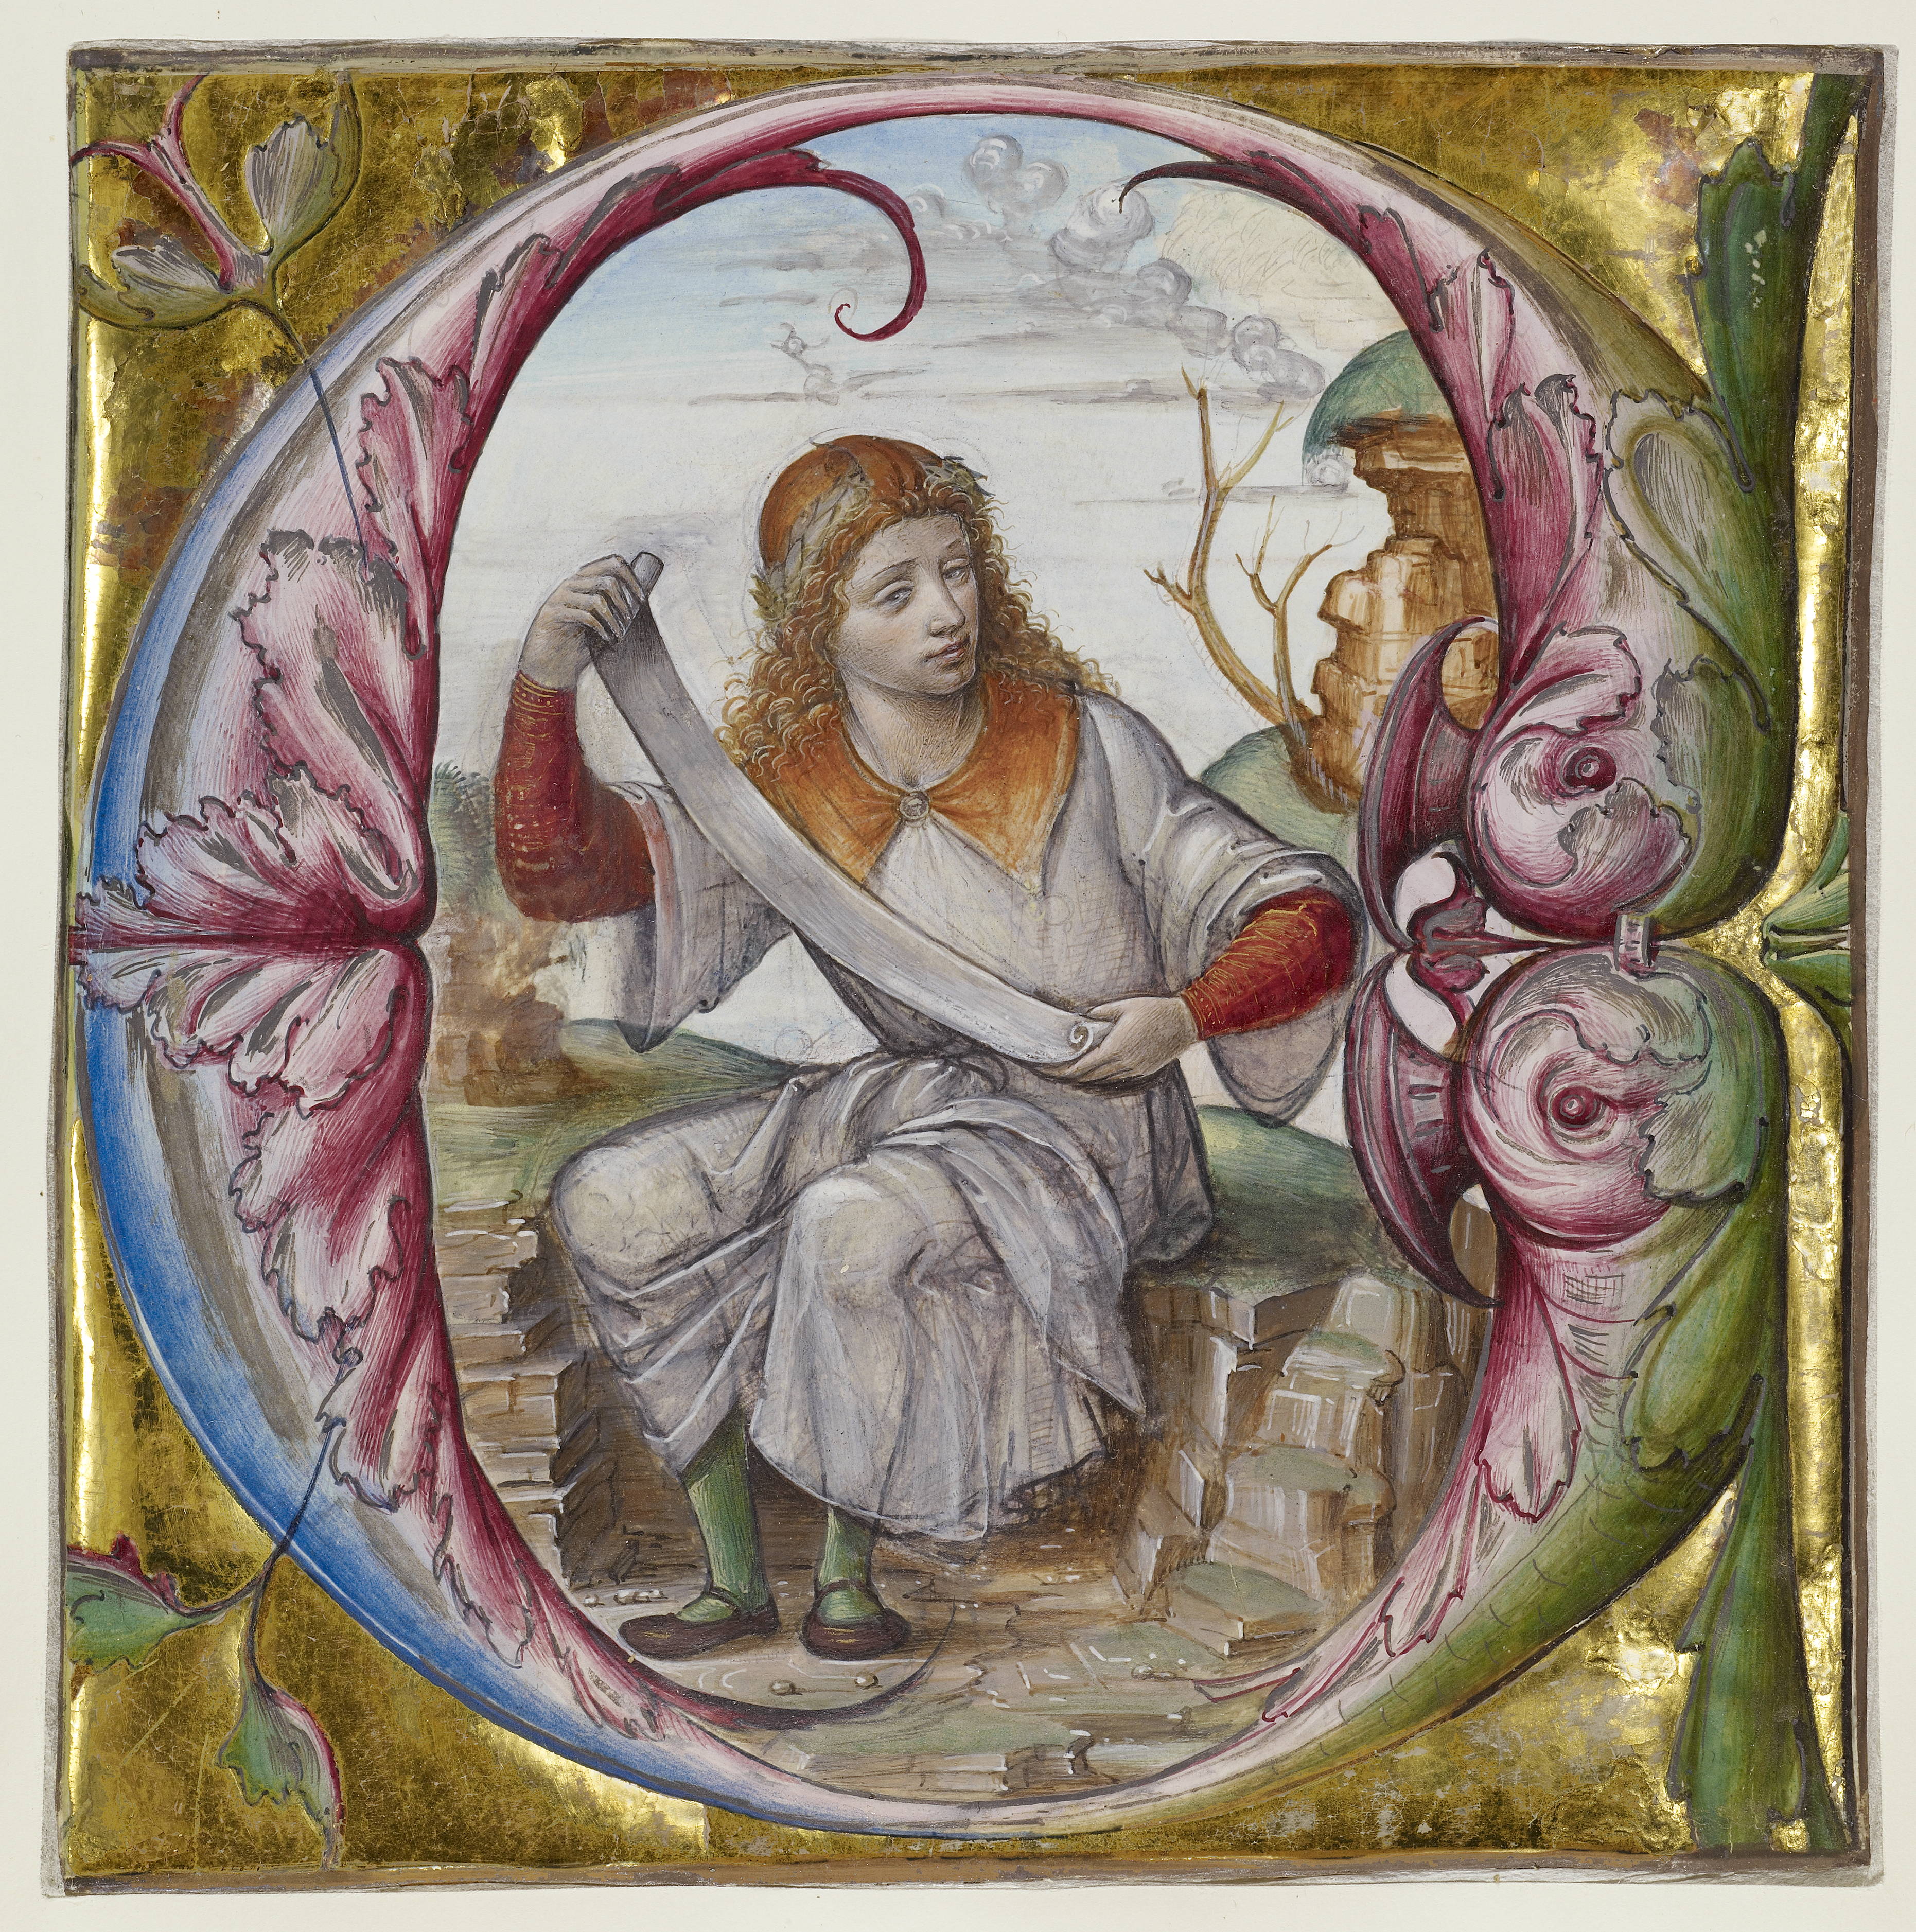 John the Evangelist from MS 104 (Getty museum)